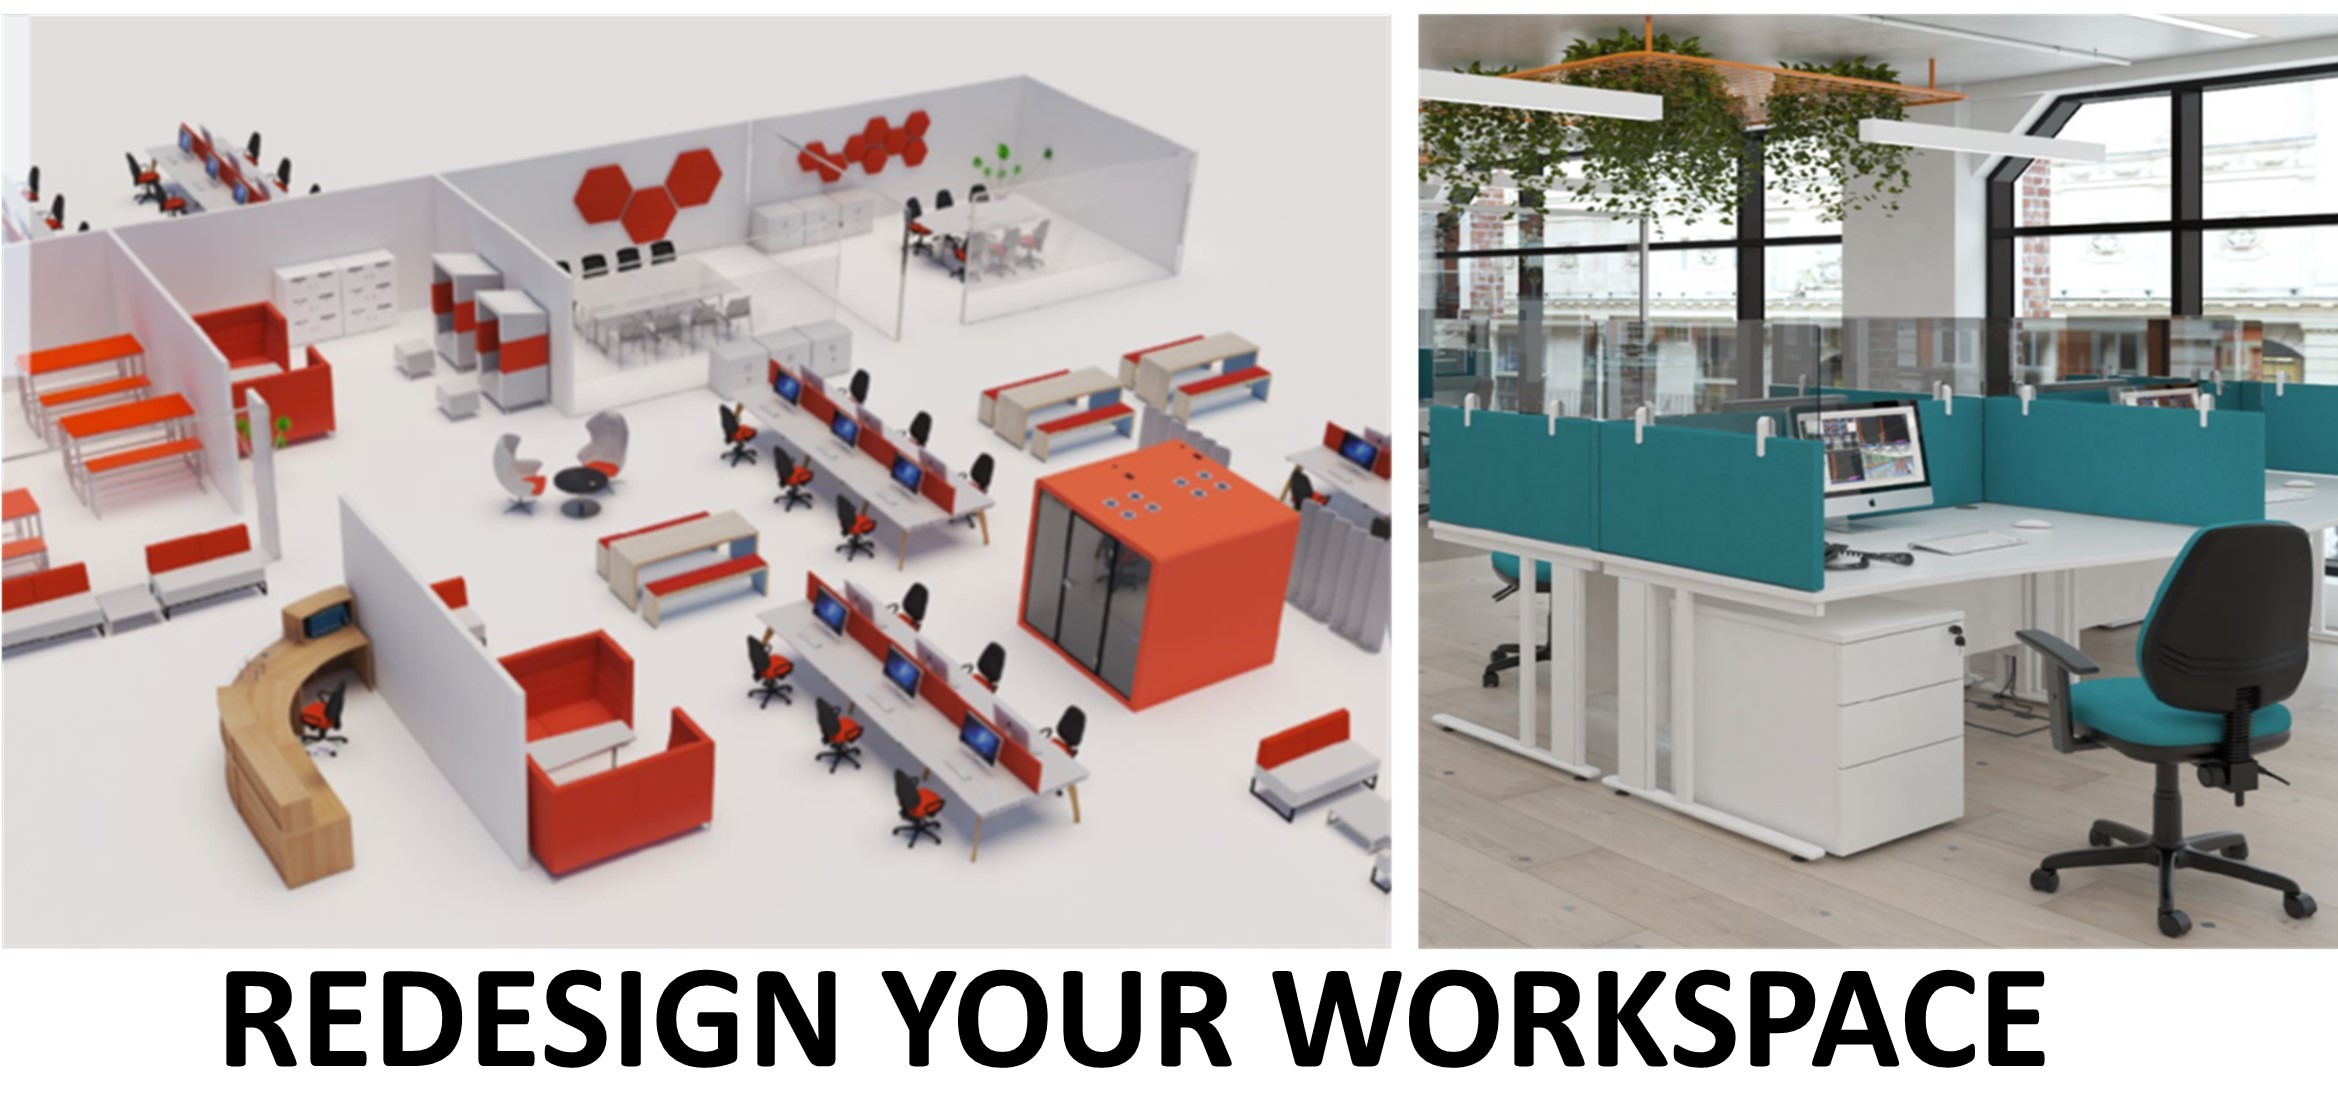 Redesign your workspace